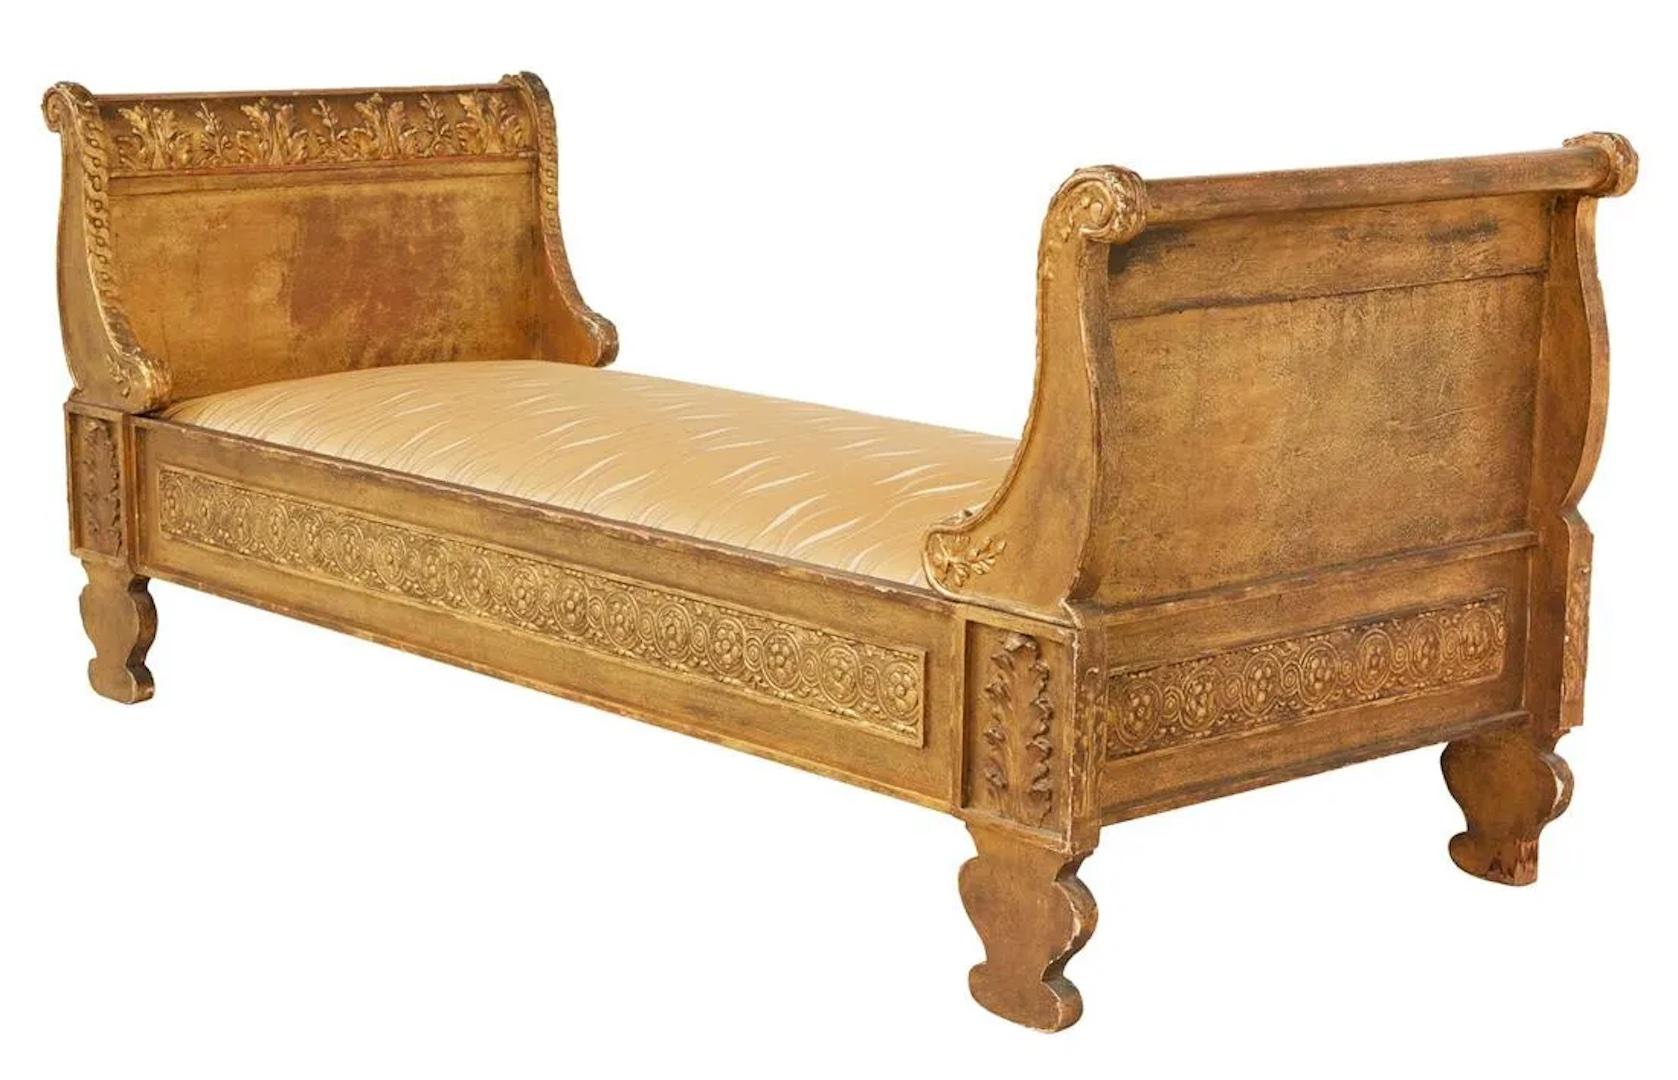 Heavily carved on all sides, the details beckon you to admire this Empire gilt daybed. Perfect for open seating between two rooms yet generous size for relaxing.
**Needs to be reupholstered; daybed comes with gold fabric on mattress, see pictures.